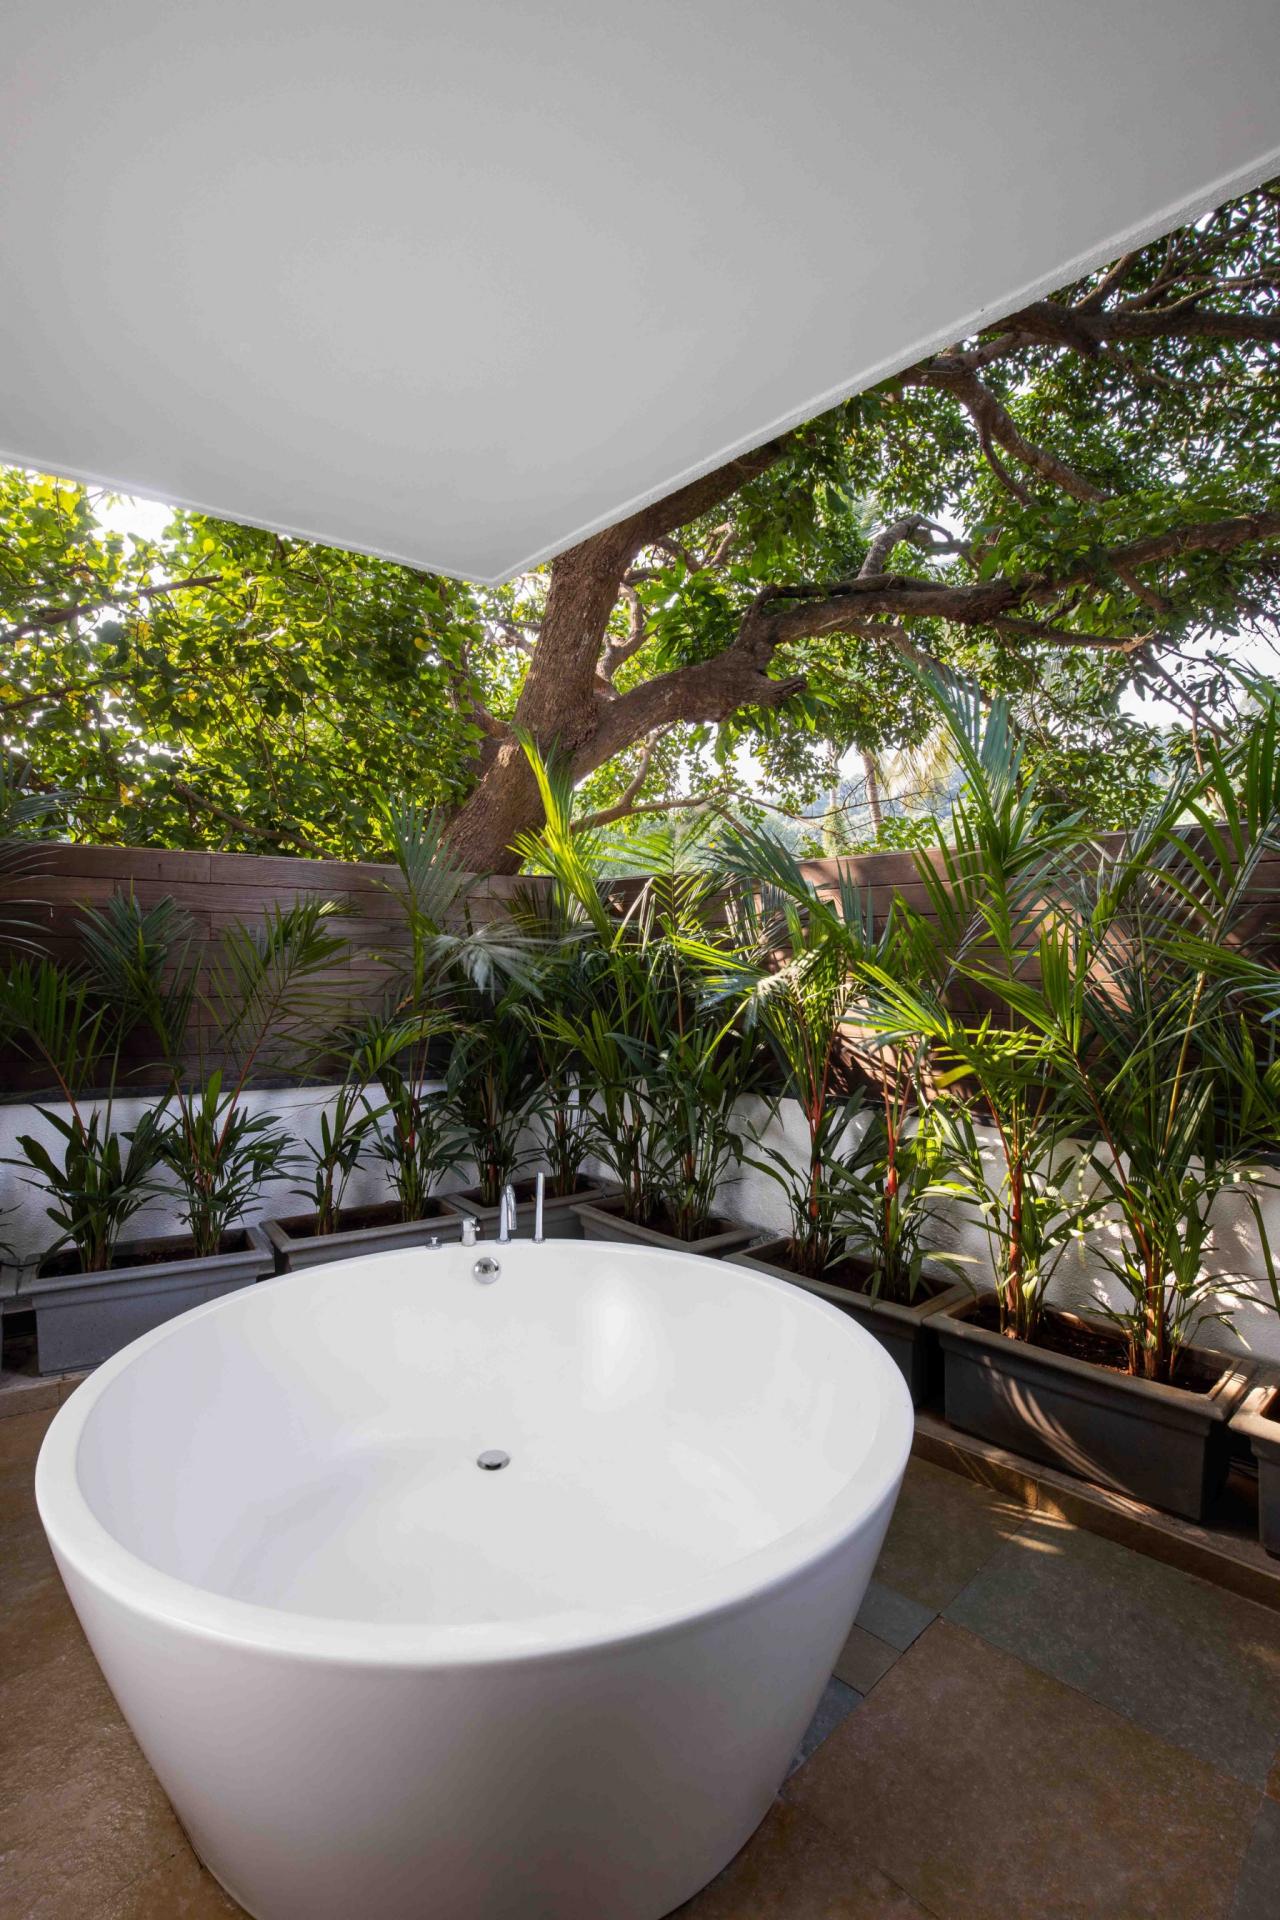 This 8,000 sq. ft. villa in India is given plenty of Goan-Portuguese flavour